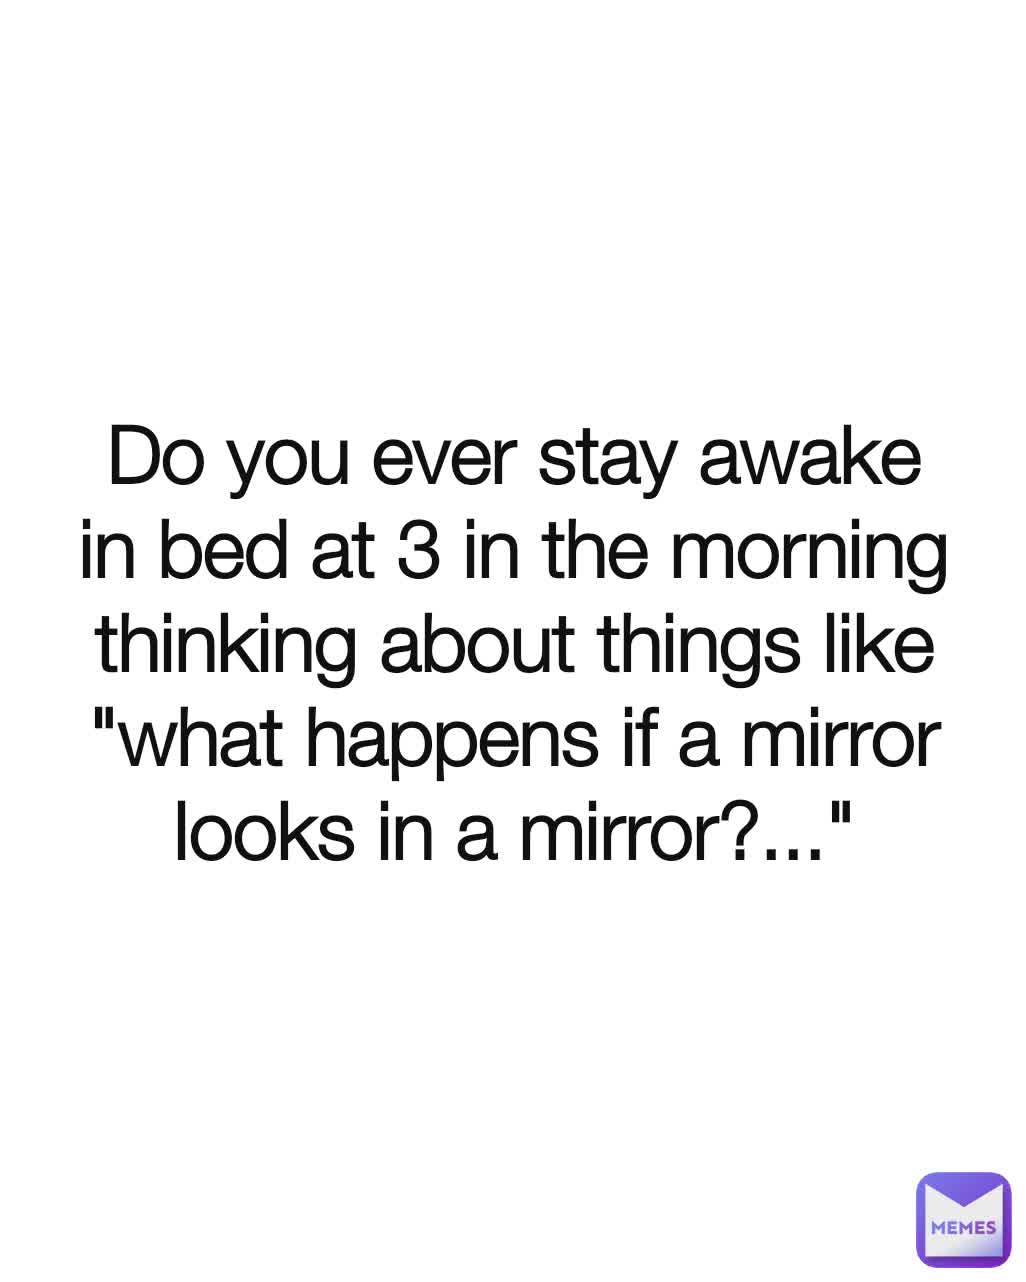 Do you ever stay awake in bed at 3 in the morning thinking about things like "what happens if a mirror looks in a mirror?..."